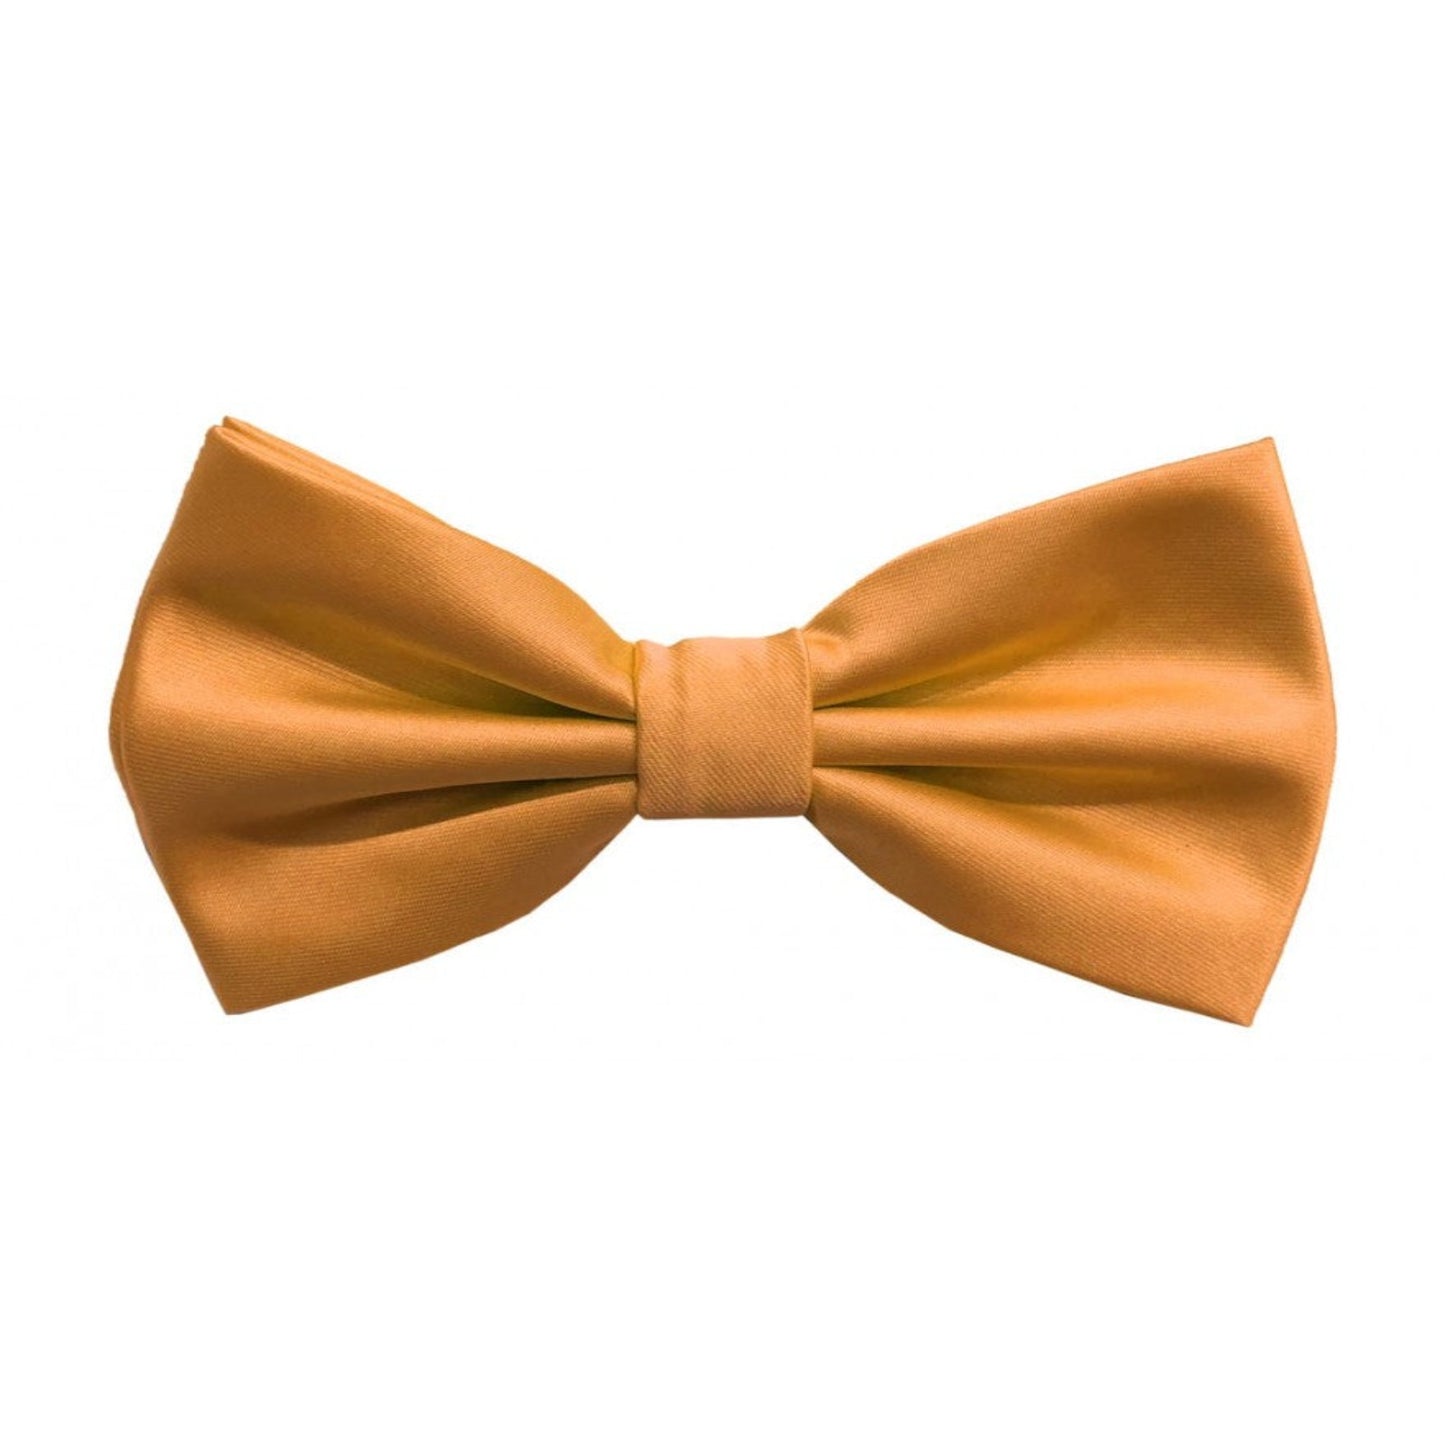 Classic Orange Bowtie With Matching Pocket Square | KCT Menswear